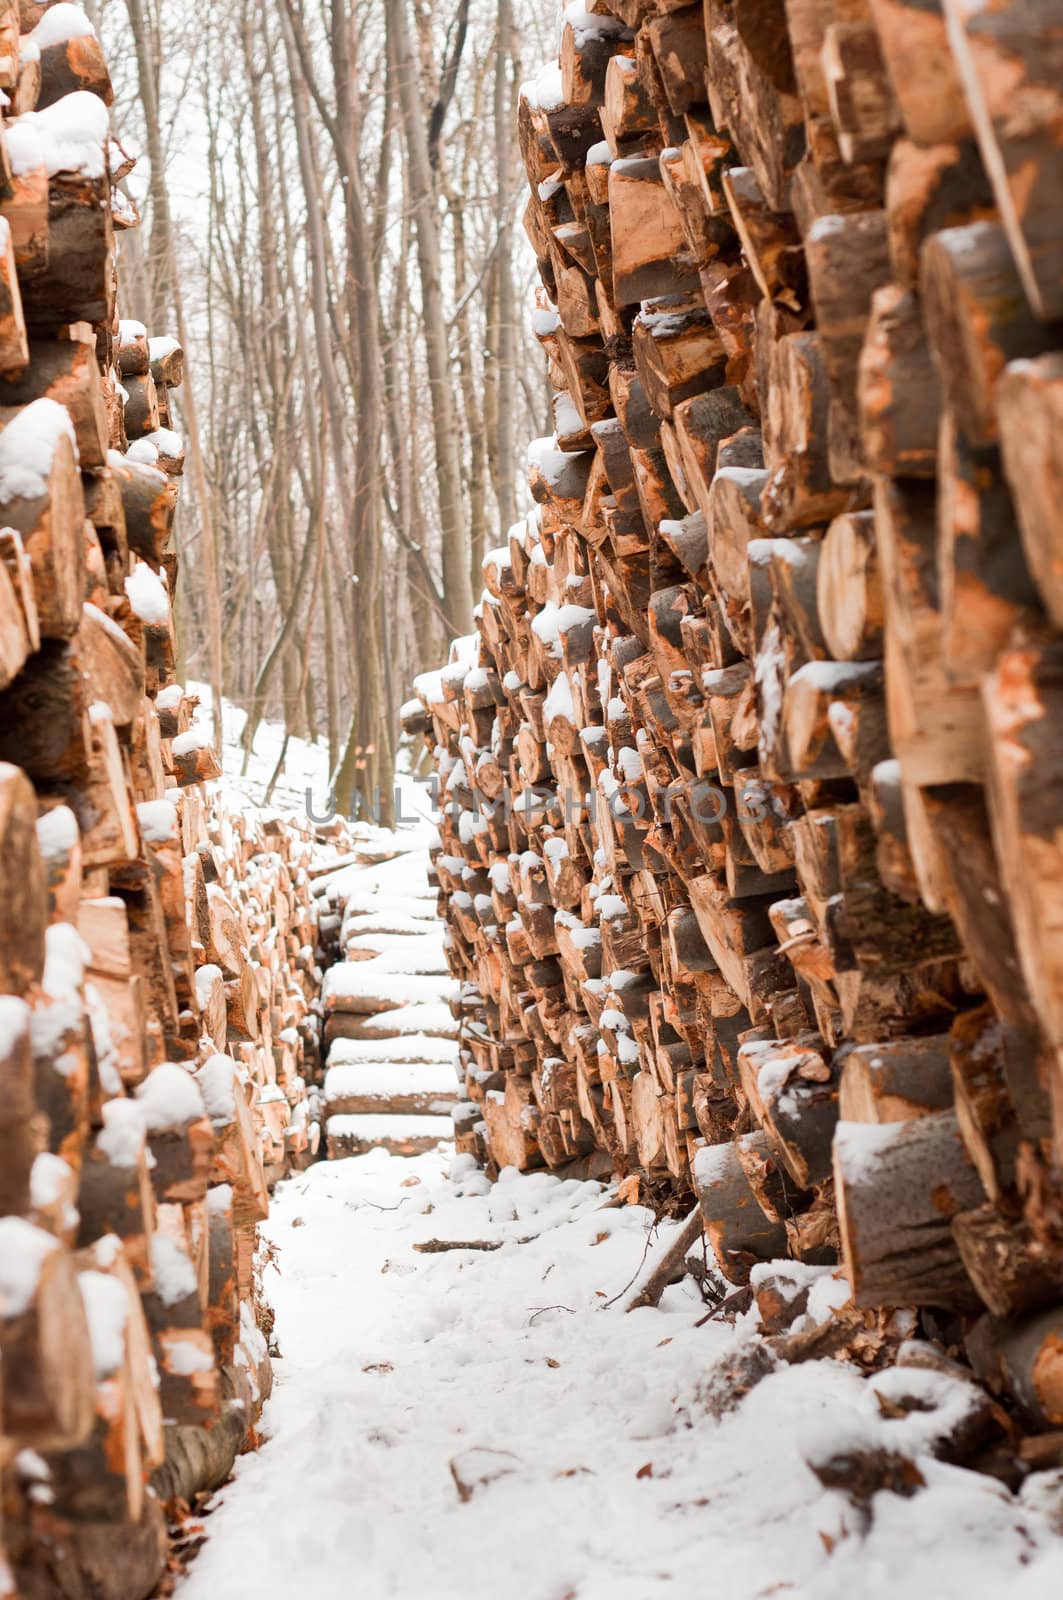 Wooden loges piled up covered by snow